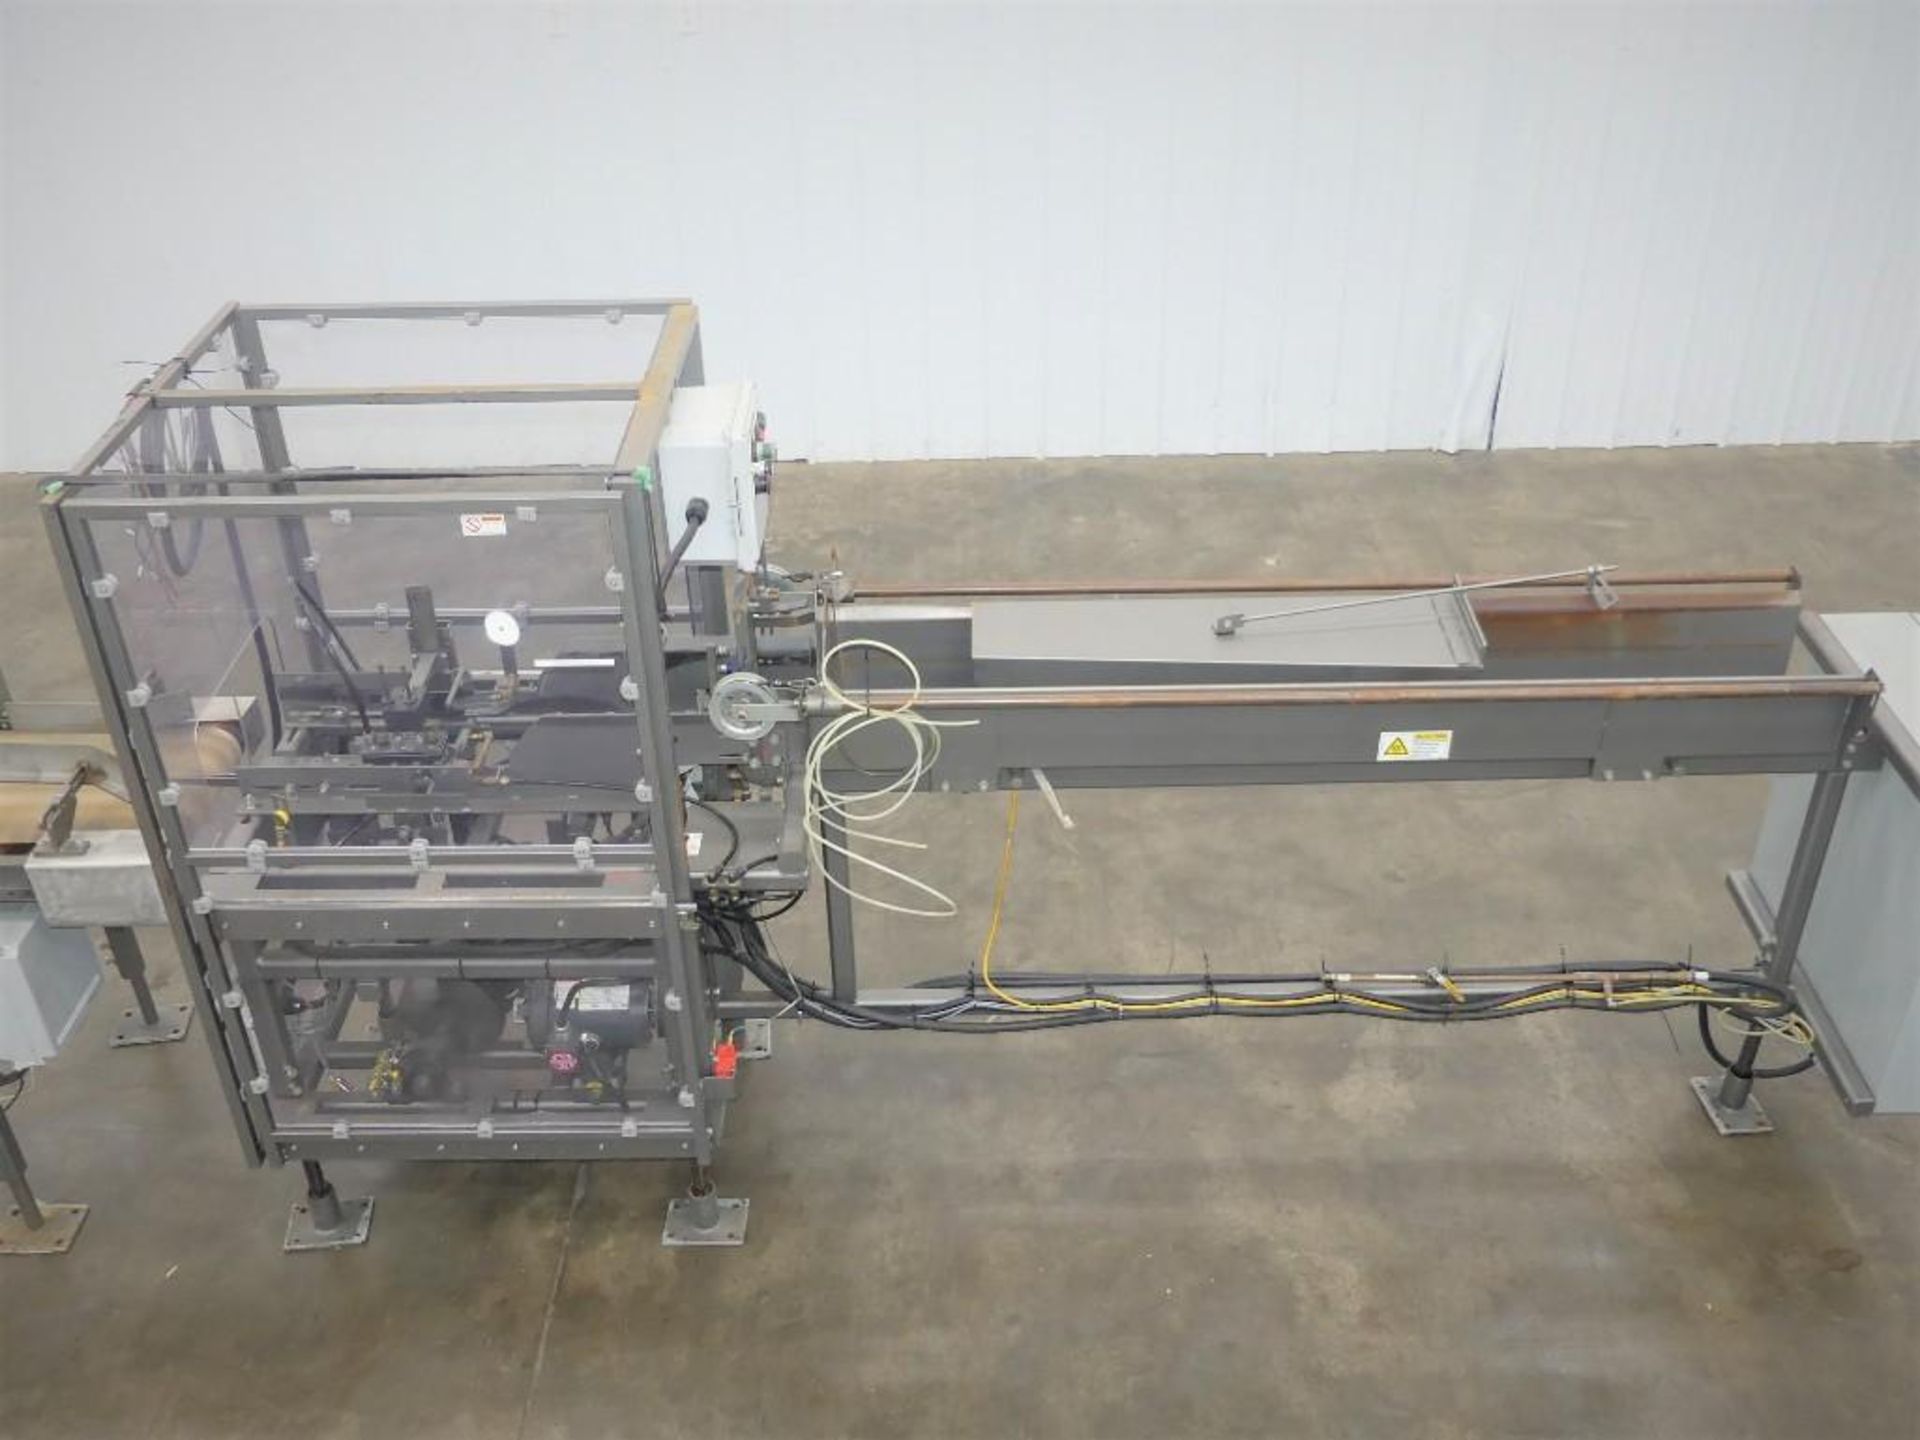 2008 Pearson BE60 6-Pack Beverage Carrier Erector with Twin Lane Conveyor - Image 6 of 39